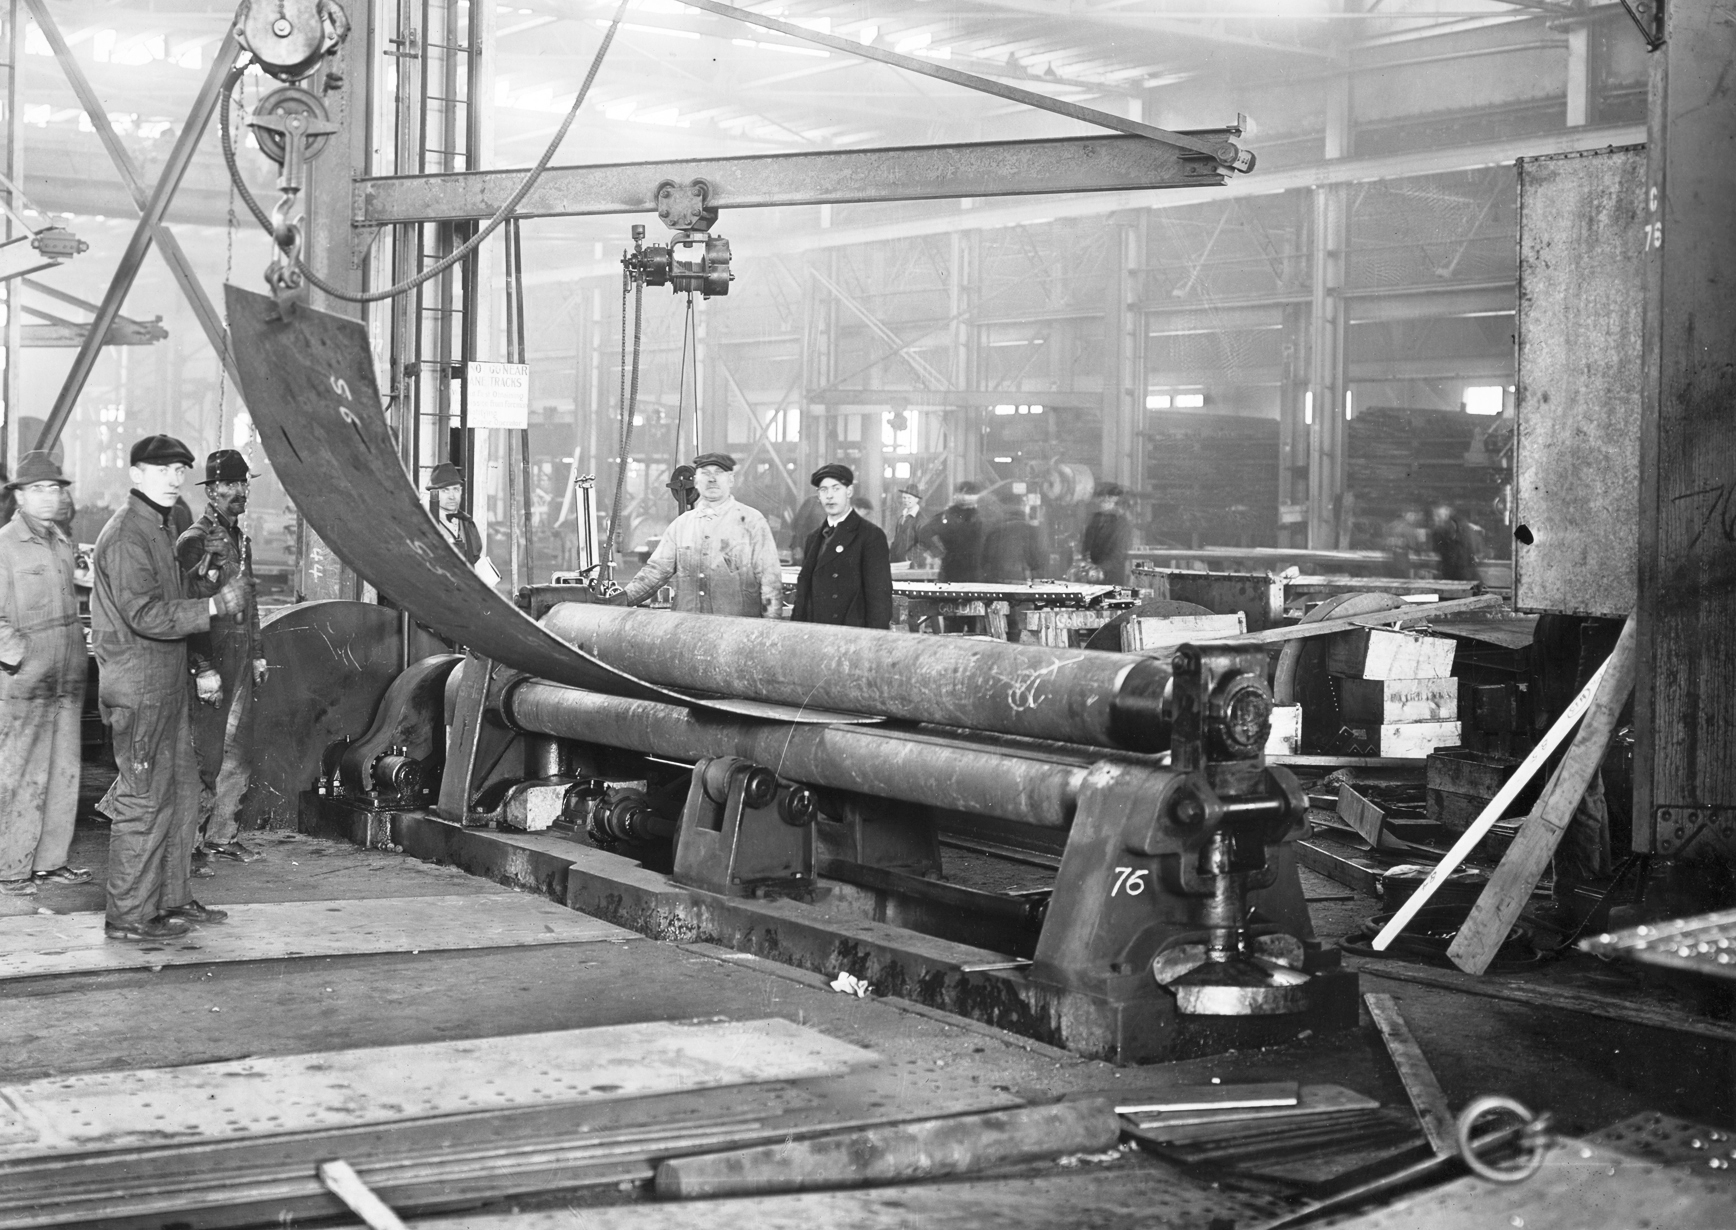 Shipfitters in one of the shops at the Puget Sound Naval Shipyard, Bremerton, Washington, United States rolling steel plate with assistance from the overhead jib crane, 1918.